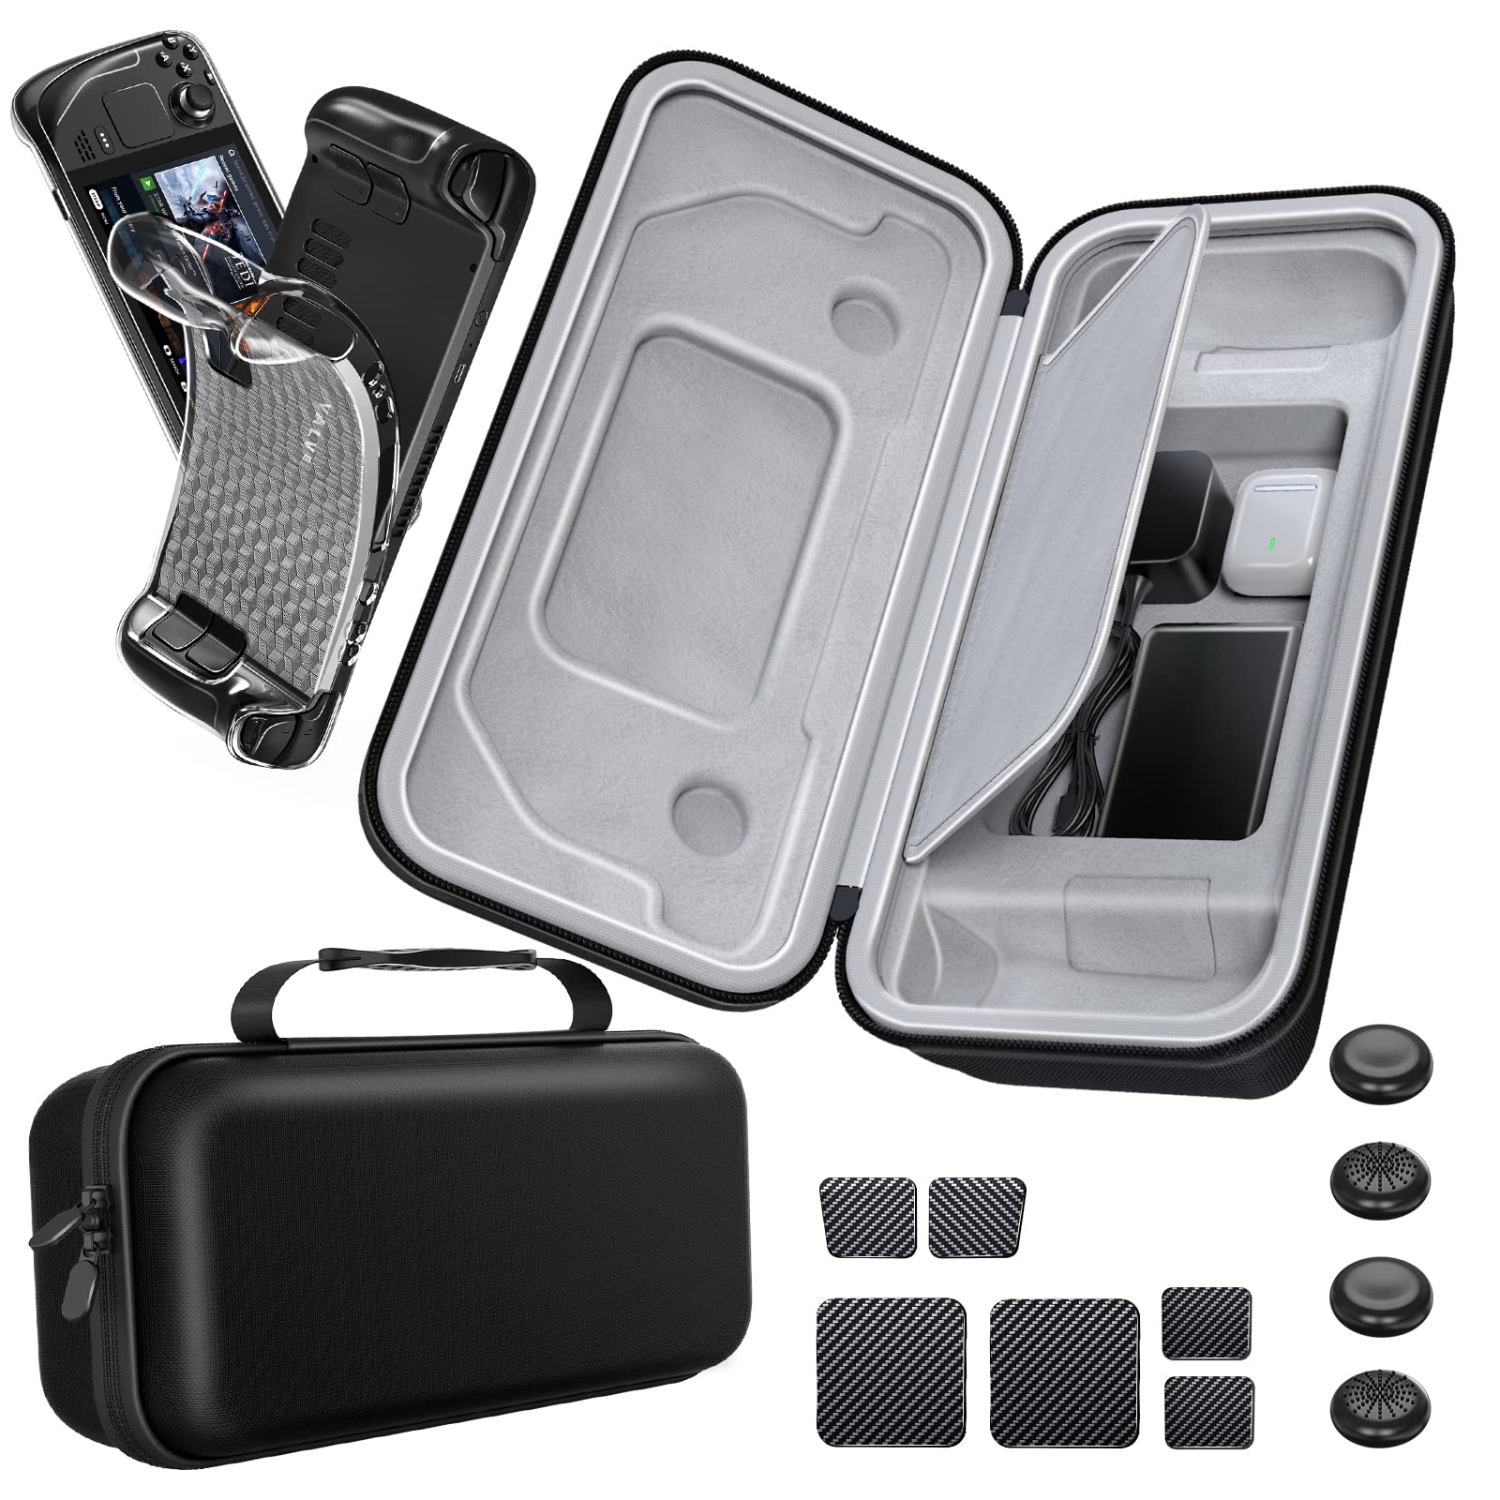 Steam Deck Carrying Case Kit with Steam Deck Case of TPU & 4 Silicone Thumb Grips Caps & 6 Touchpad Stickers Portable Steam Deck Accessories Bundle 12 in 1 for Storage Traveling Gi